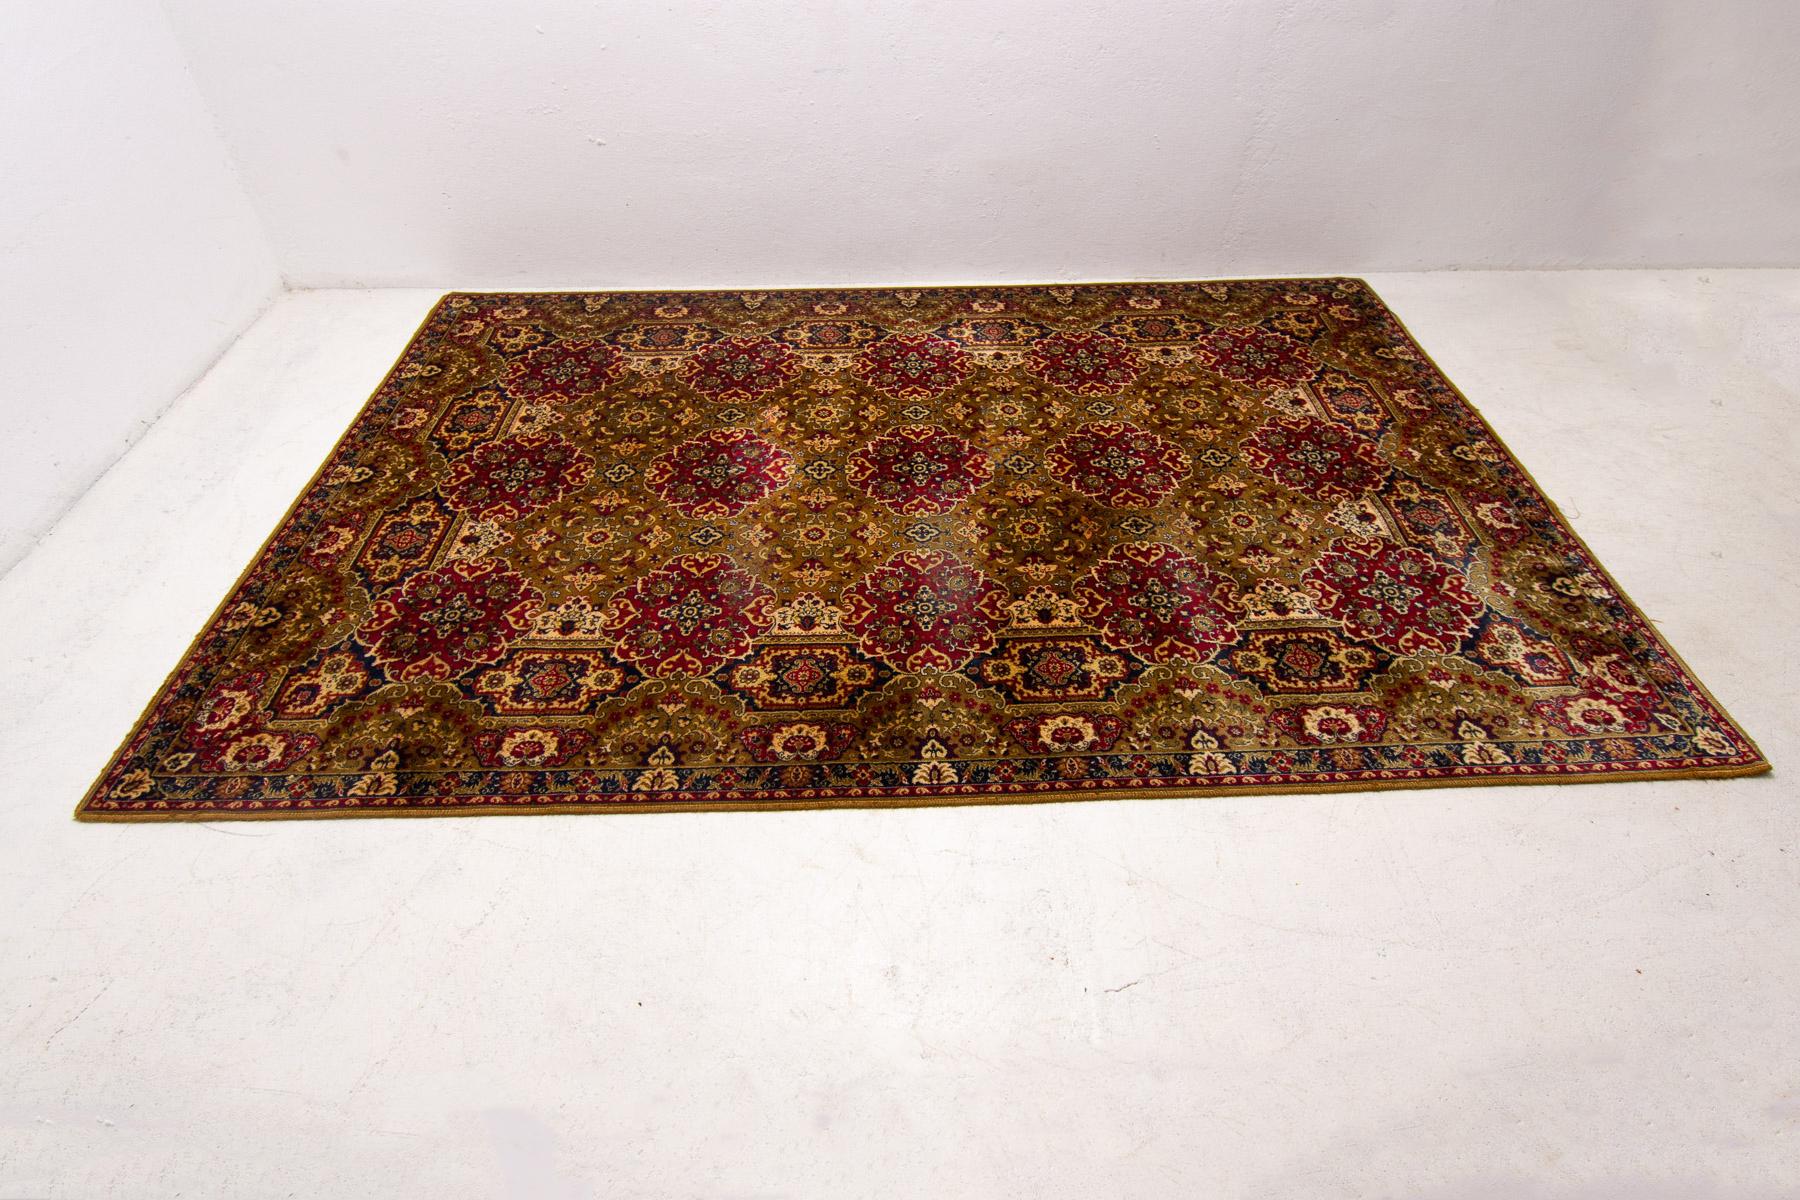 Vintage modern rug, made in the 1970s. Slight signs of age and using, but overall in good vintage condition.

Dimensions: 300 x 200 cm.